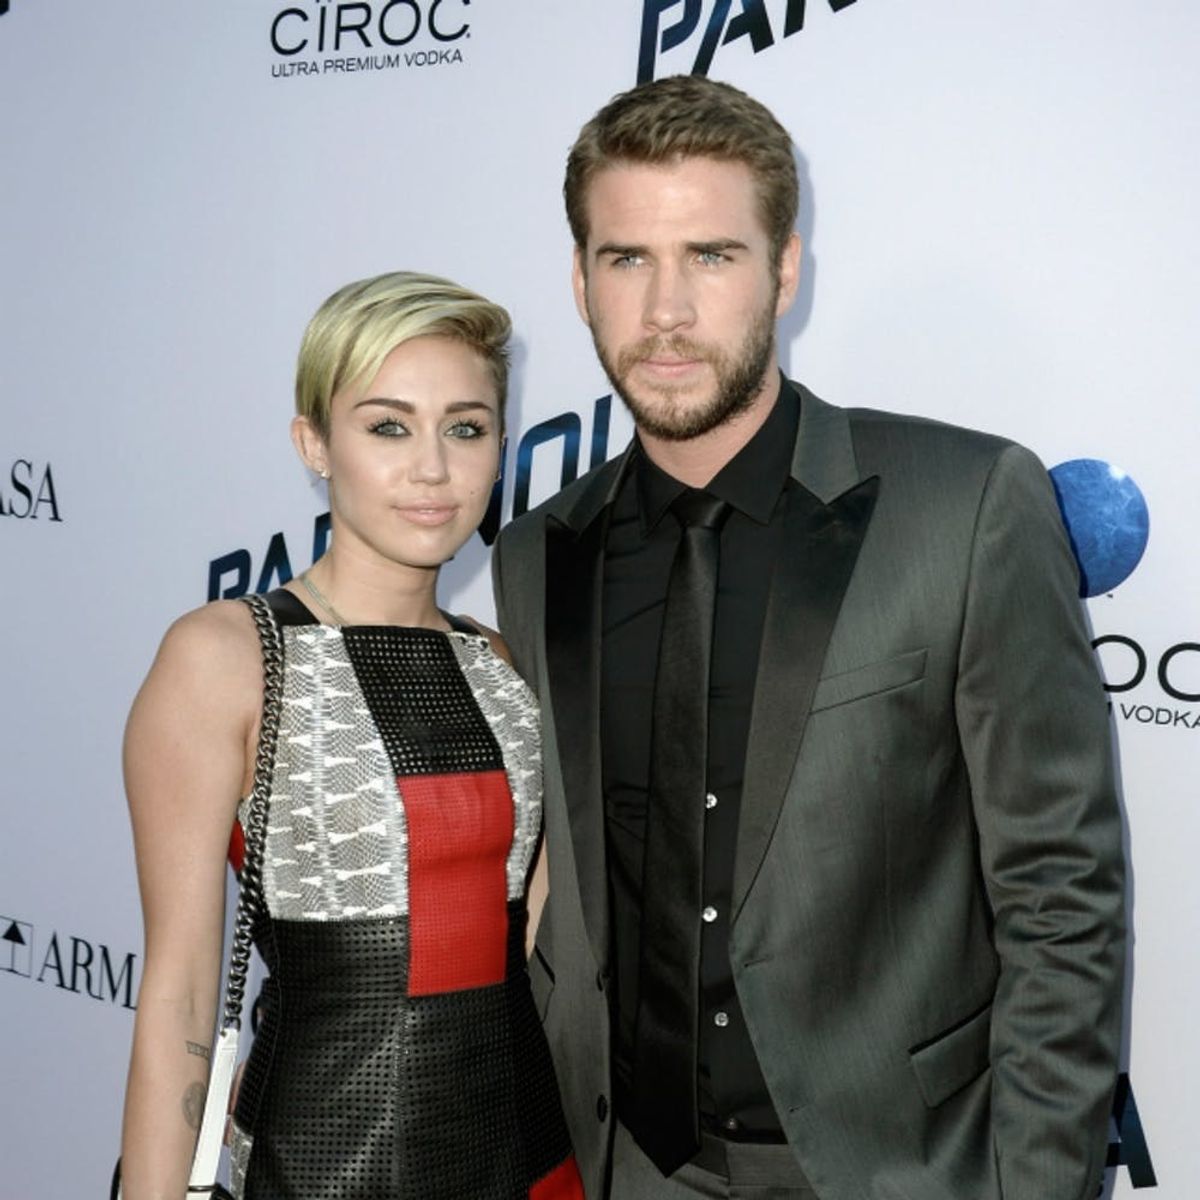 The Story Behind Miley Cyrus’ Engagement Ring Will Make You Swoon